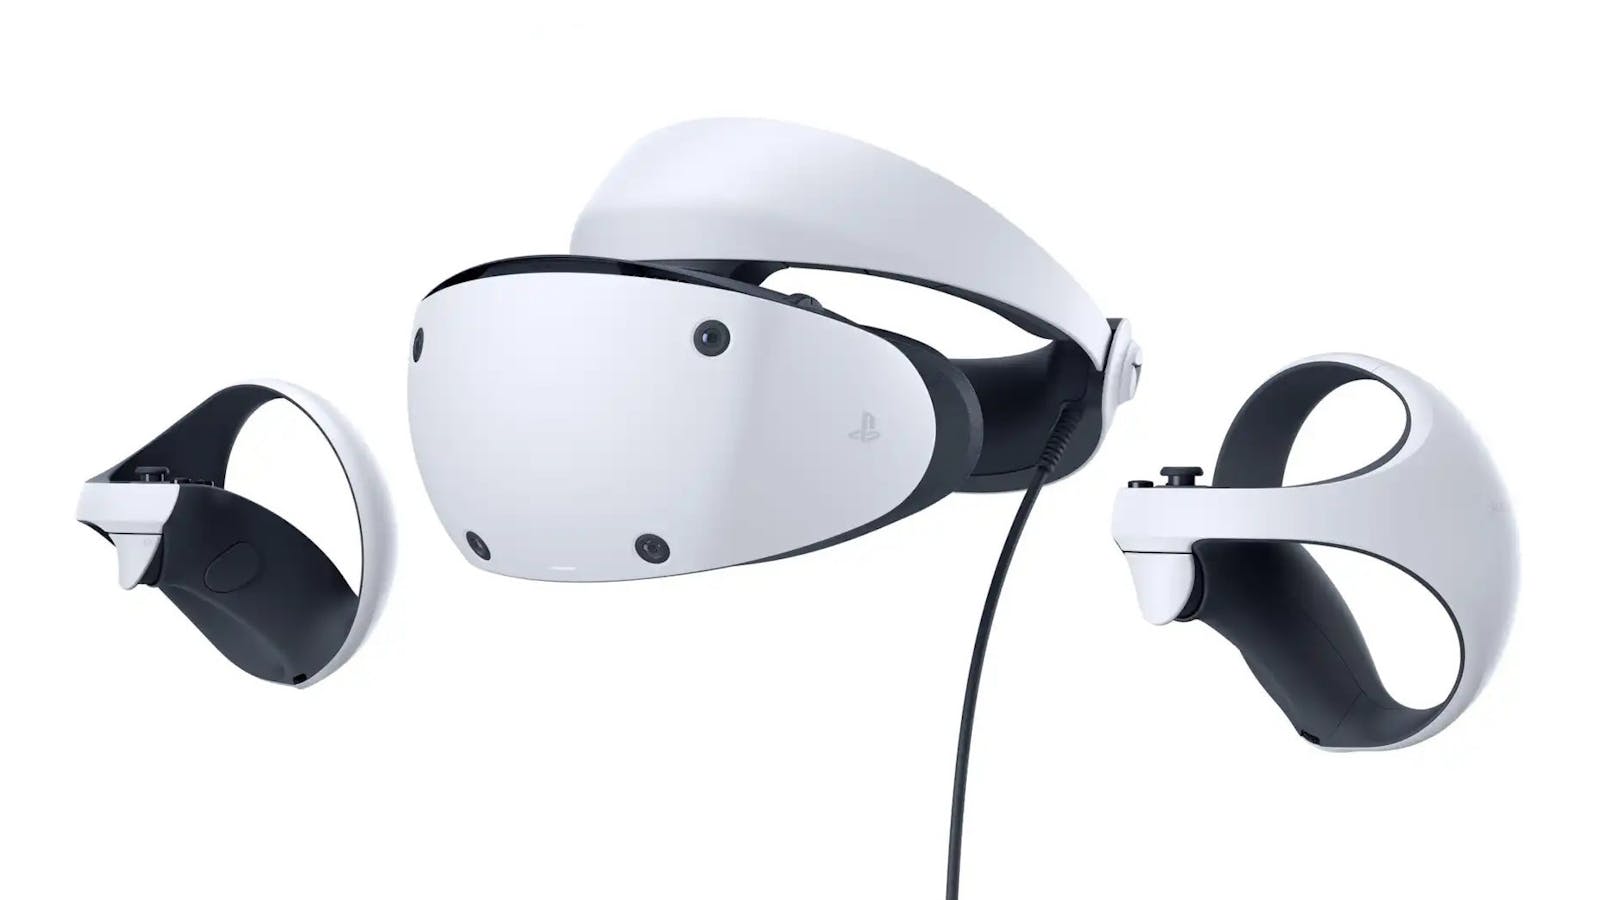 The PlayStation VR2 headset, flanked by right and left hand VR2 "Sense" controllers. Credit: Sony.